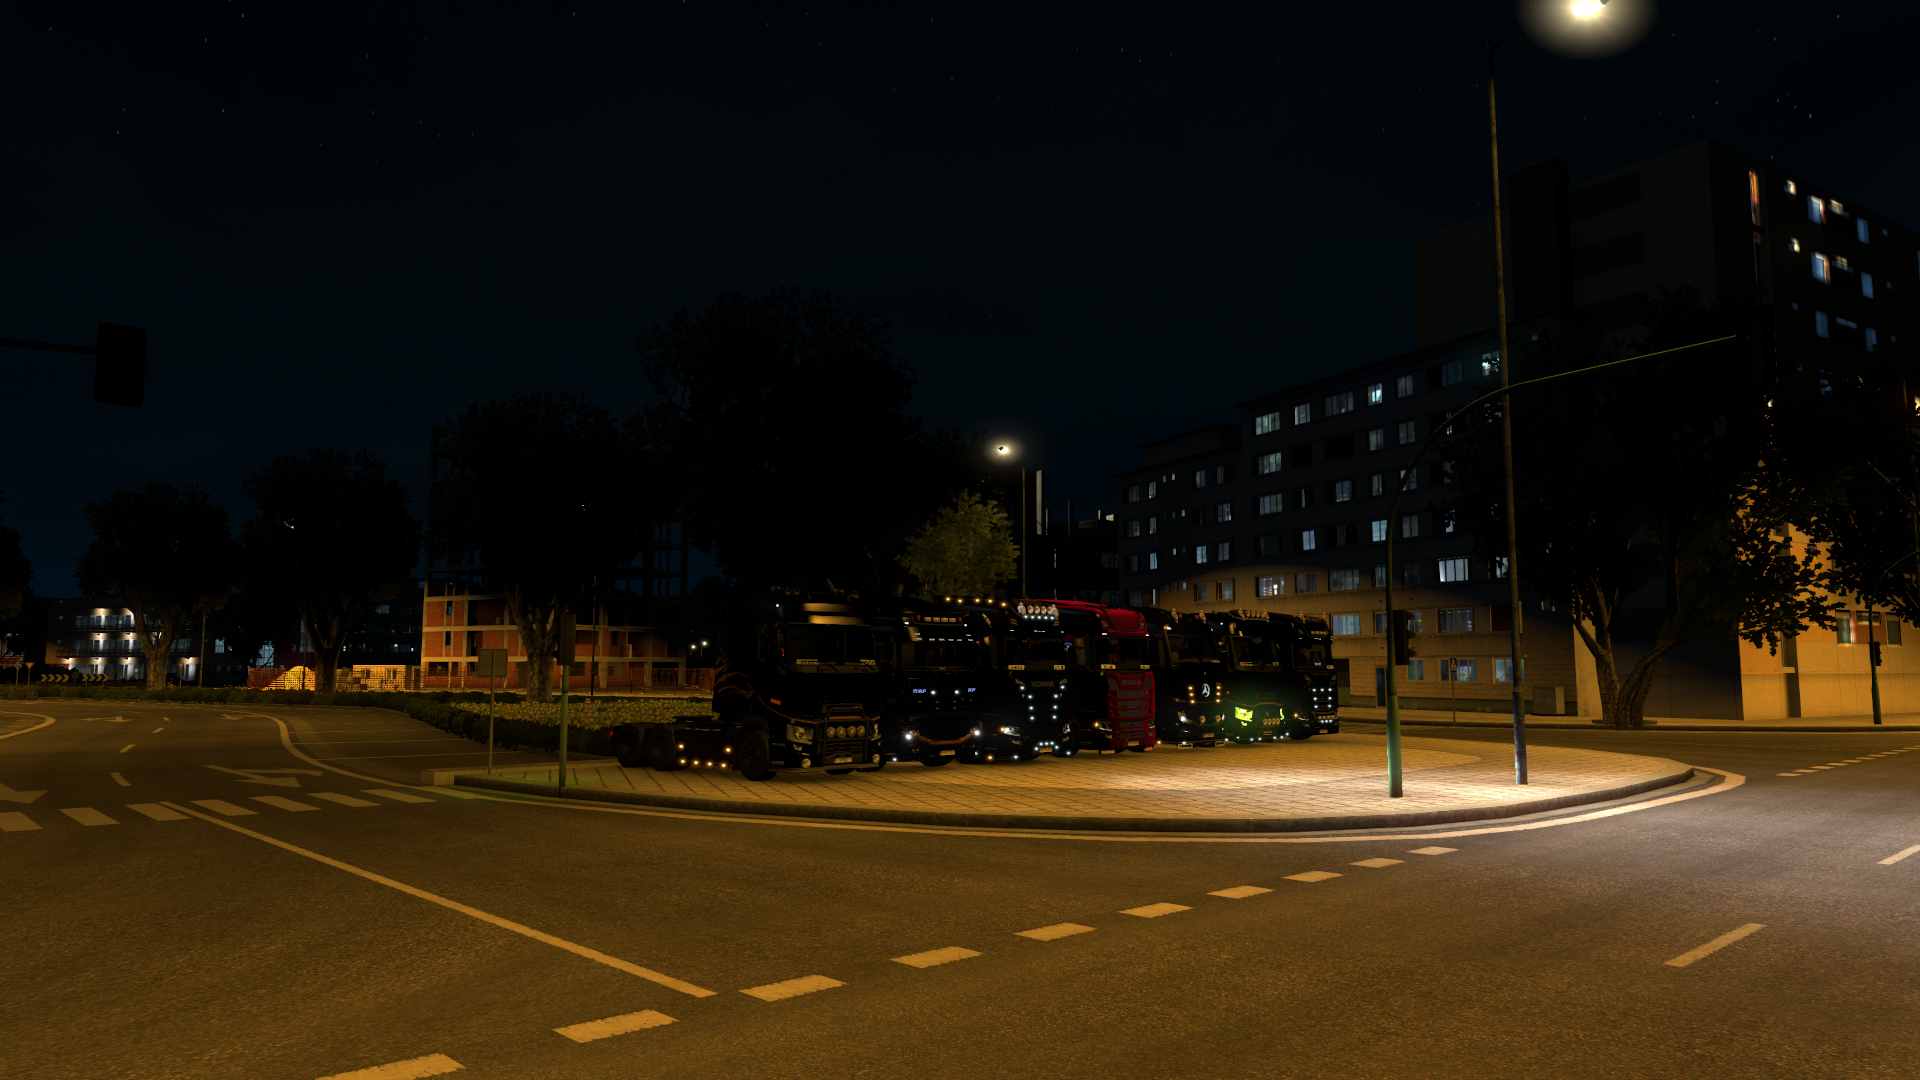 ets2_20210328_010210_00.png